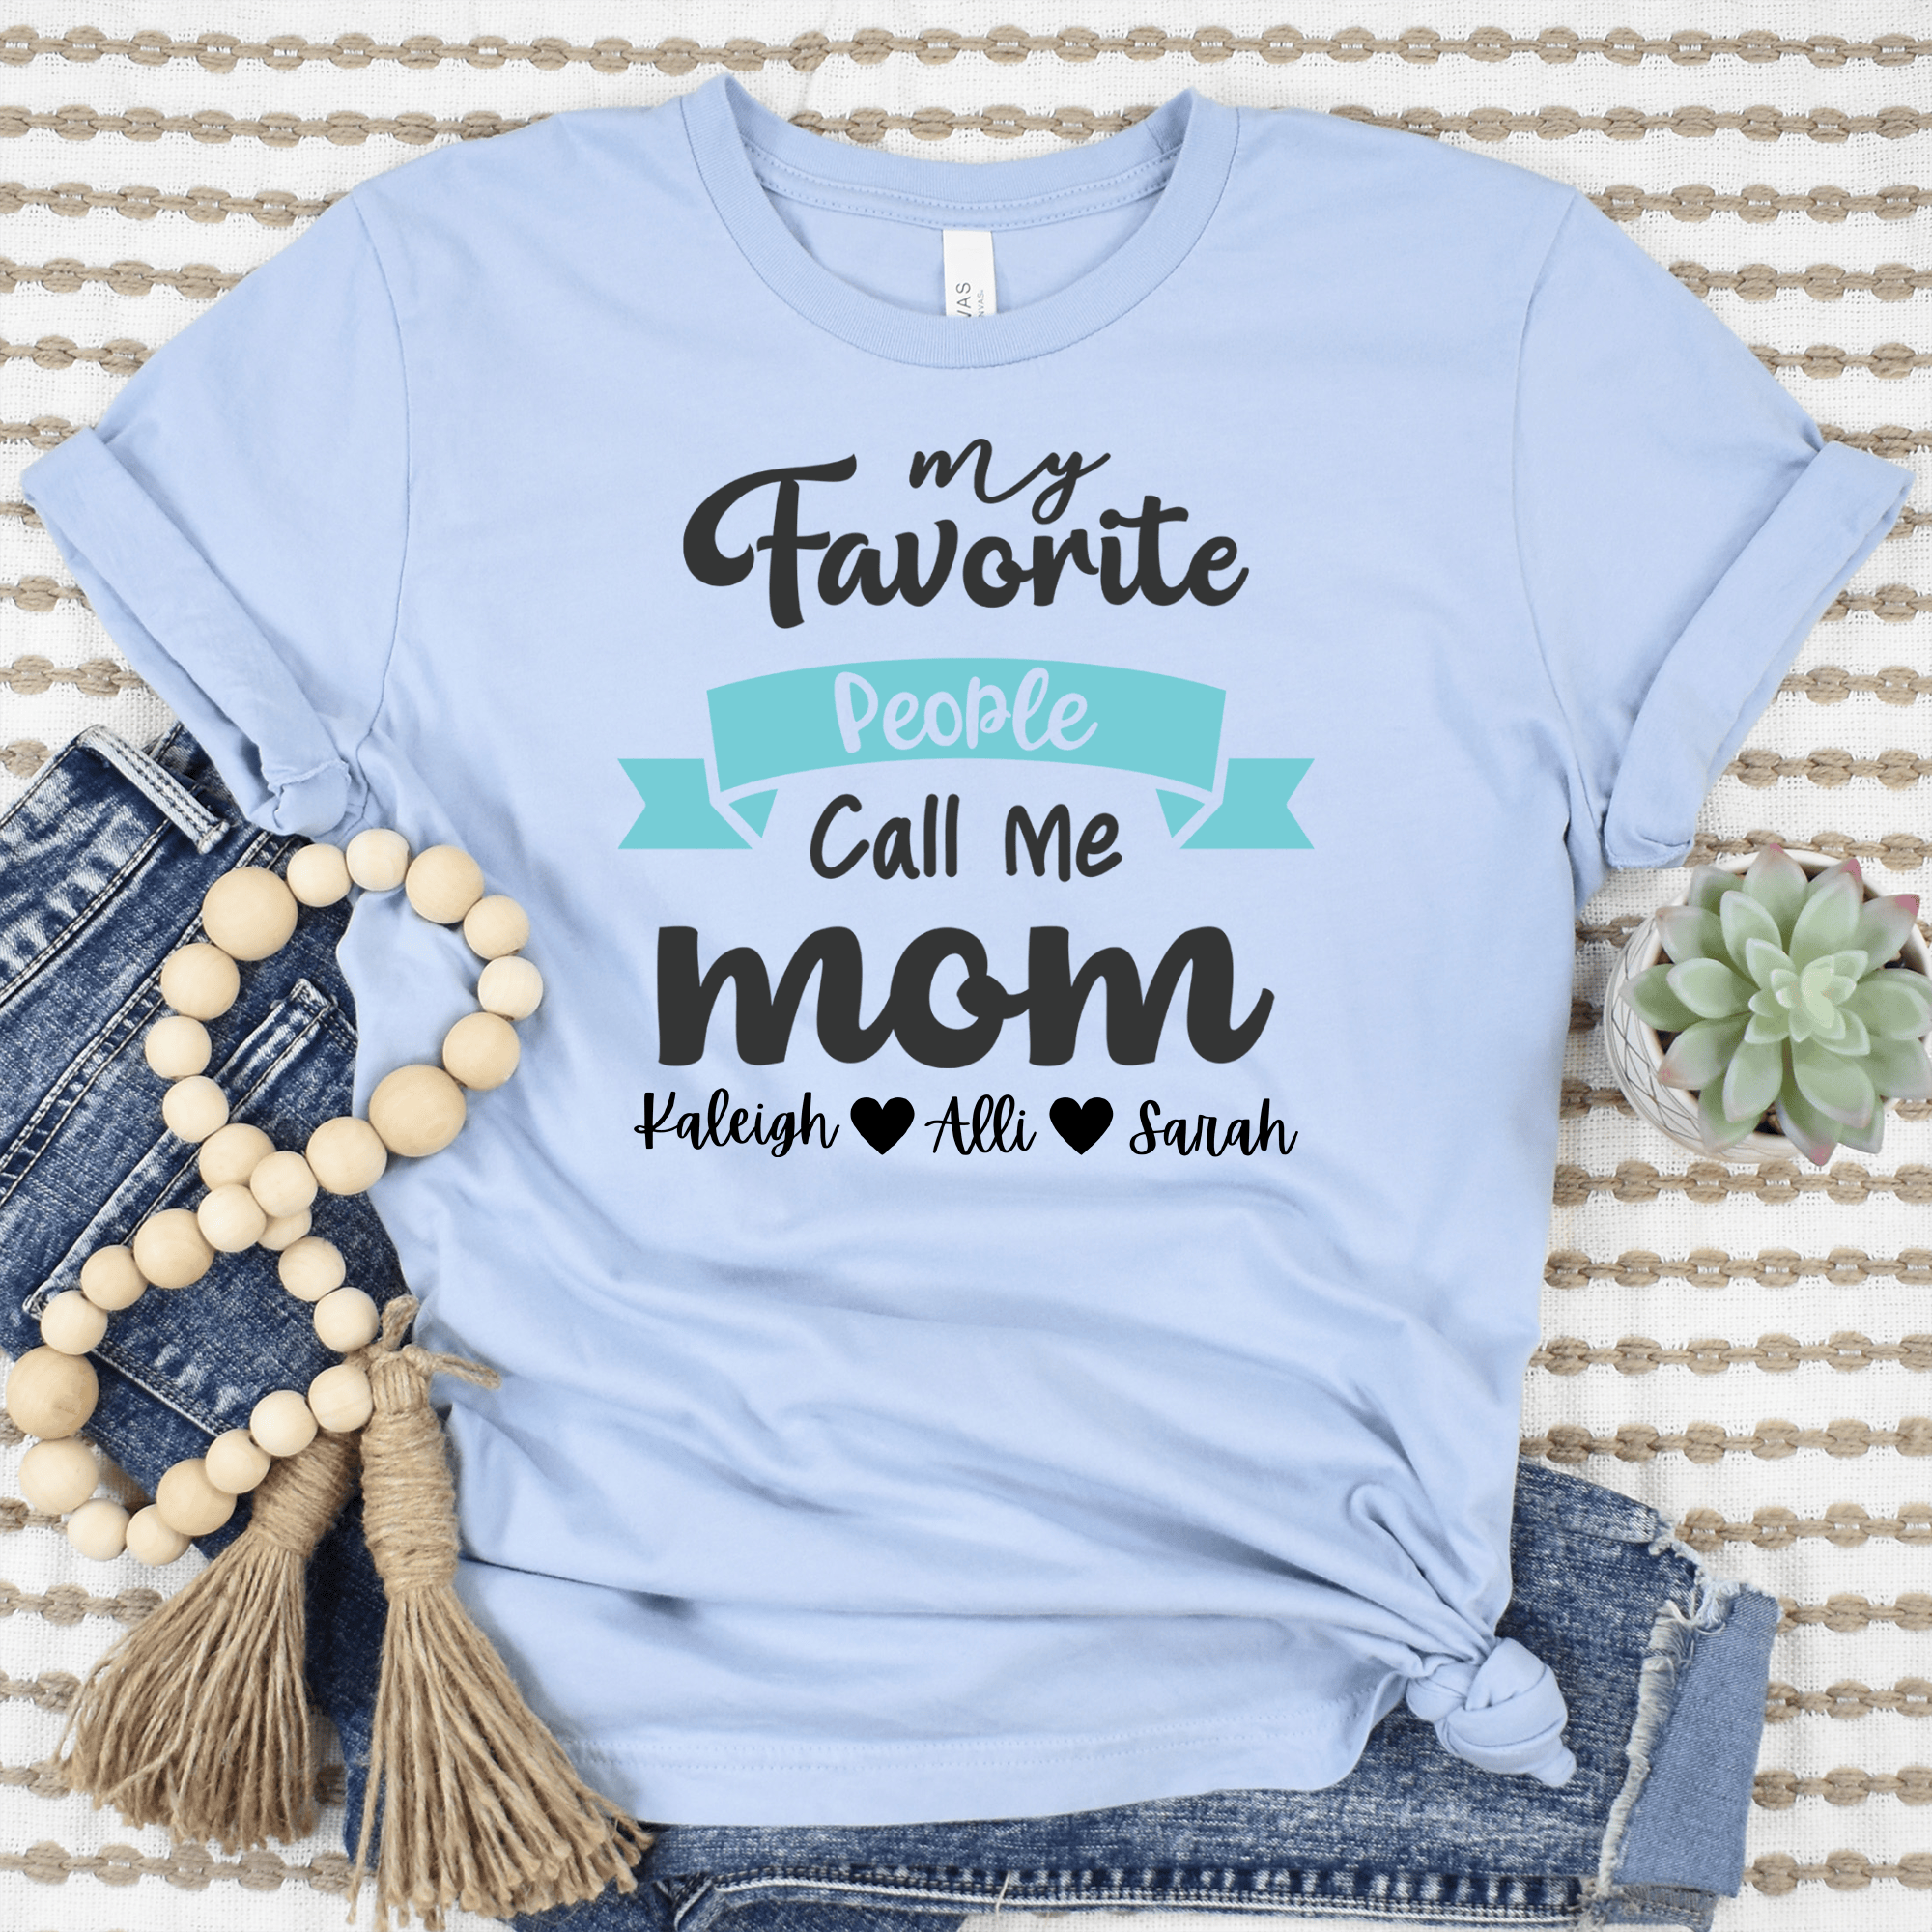 Womens Light Blue T Shirt with Favorite-People-Call-Me-Mom design